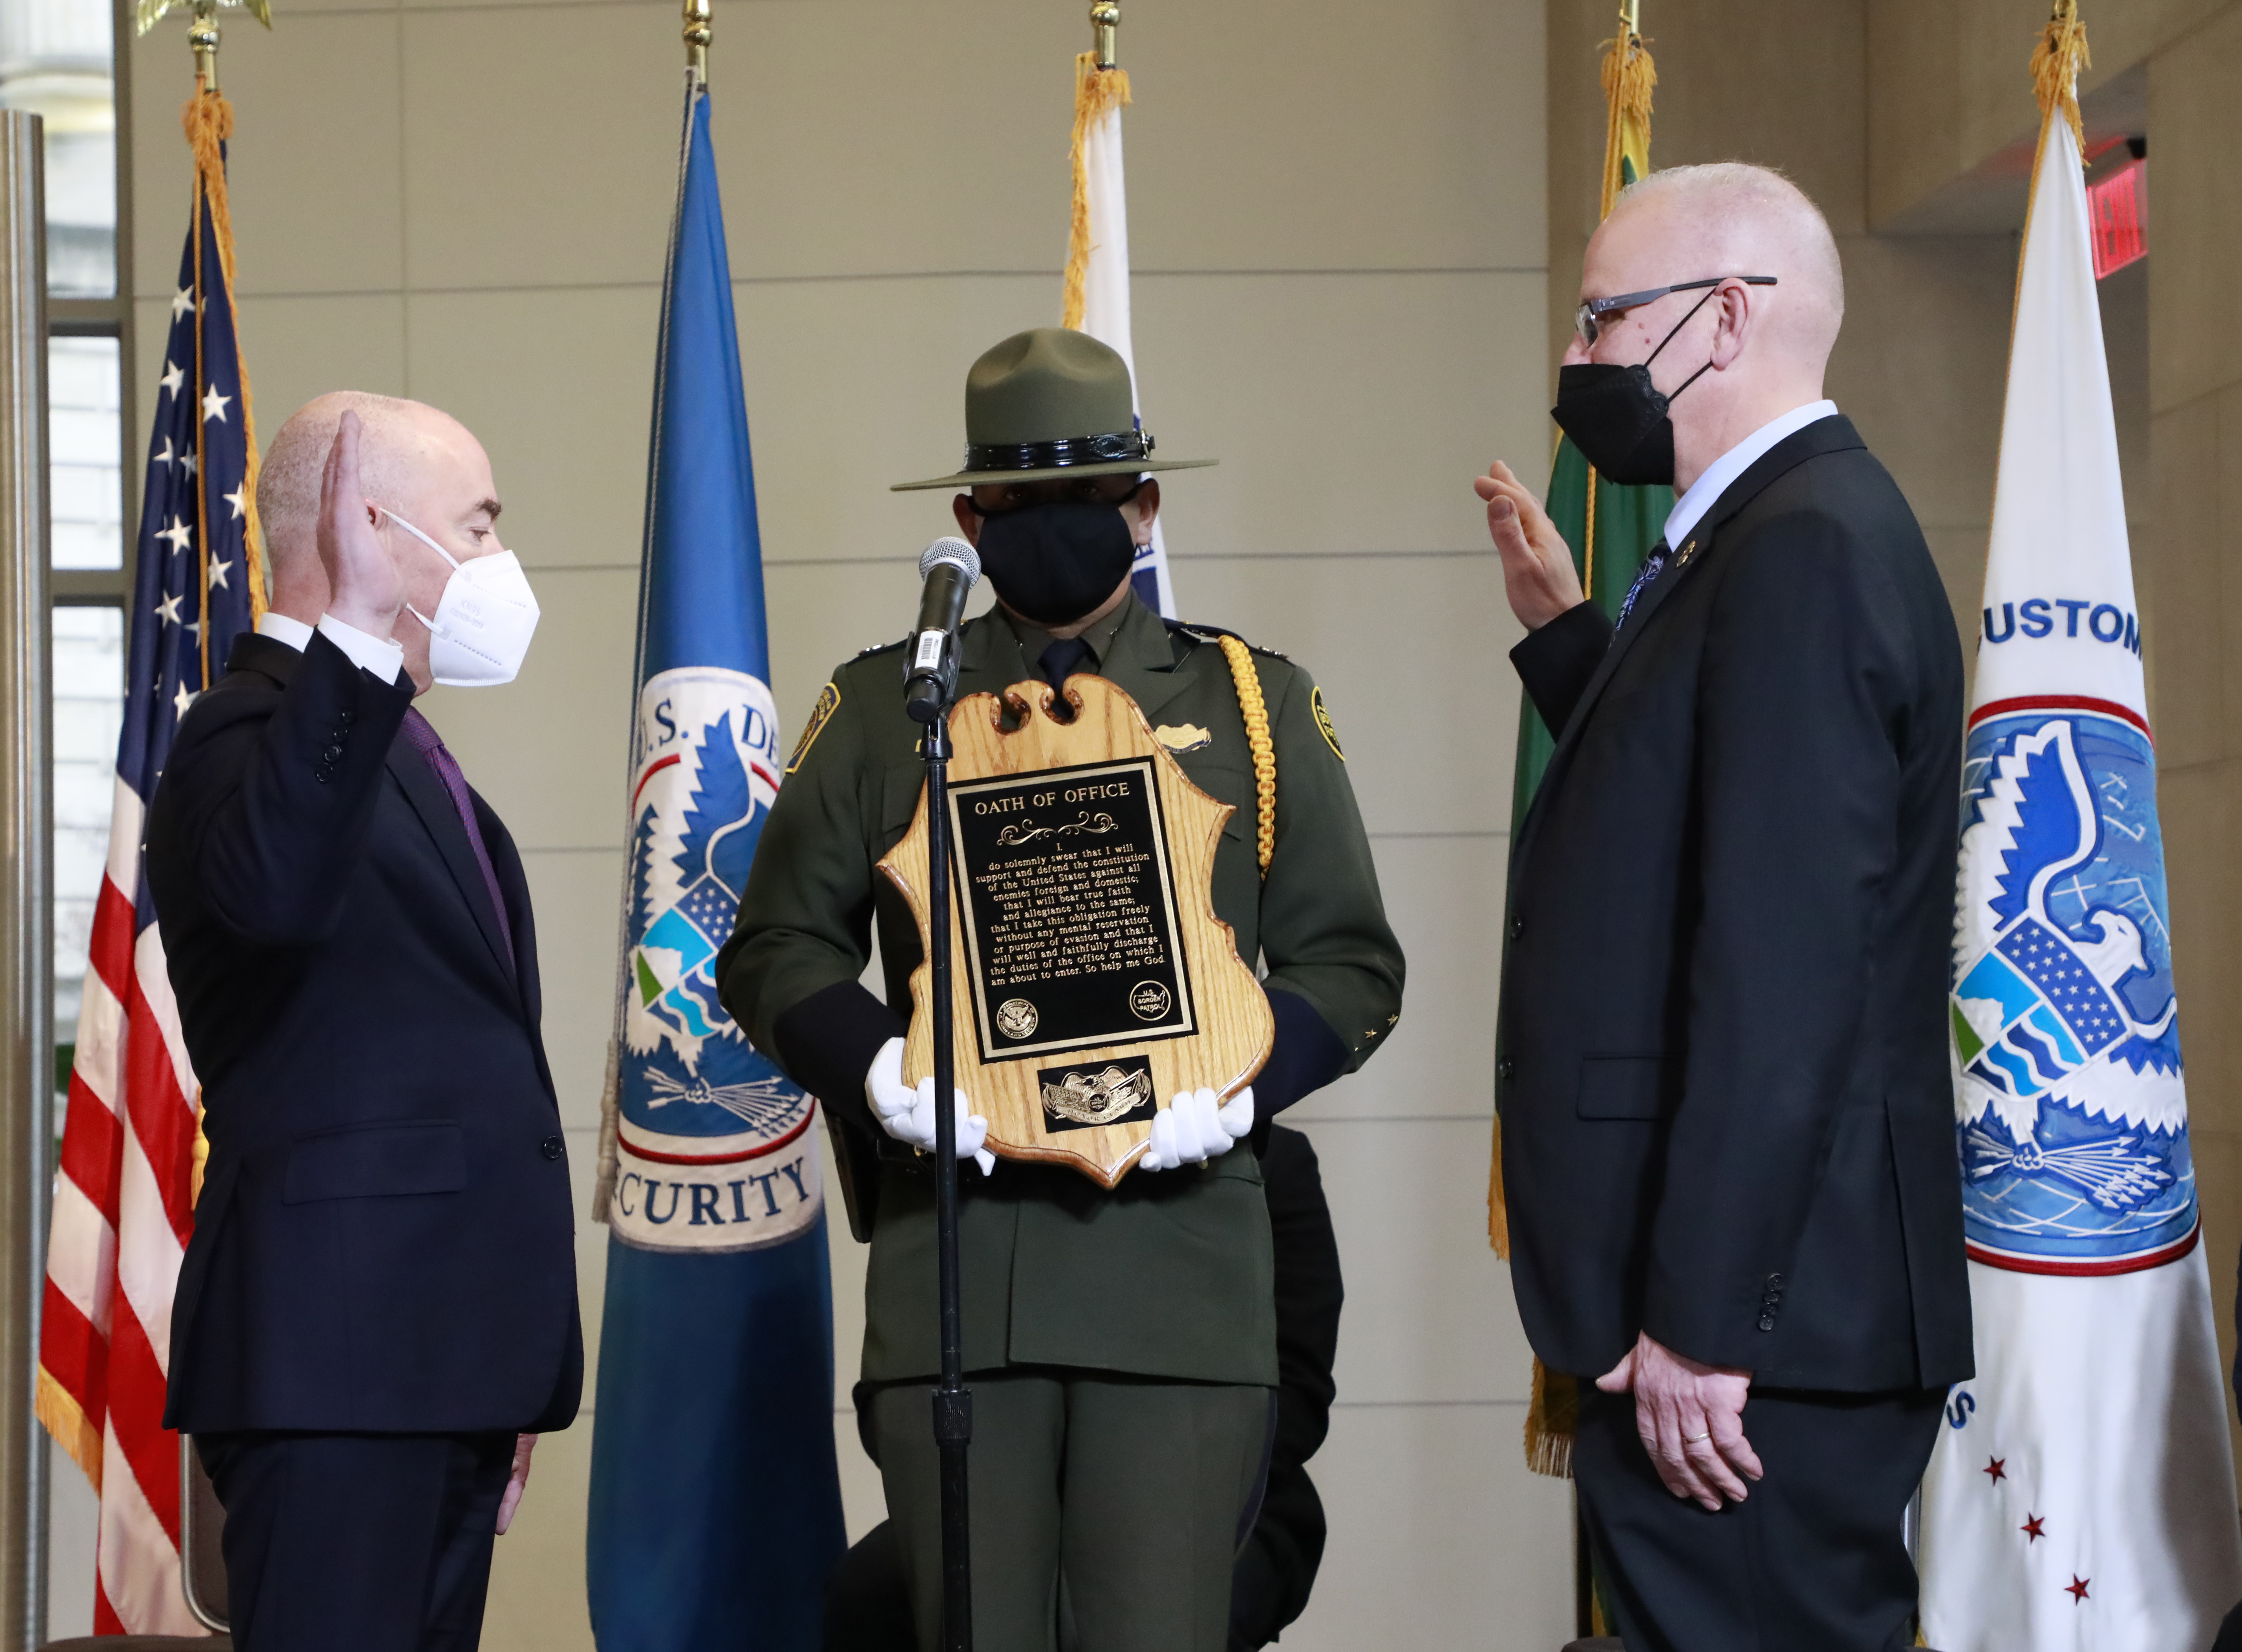 CBP Commissioner Chris Magnus, right, is sworn in by Secretary of Homeland Security Alejandro Mayorkas during the ceremonial swearing in earlier this year.